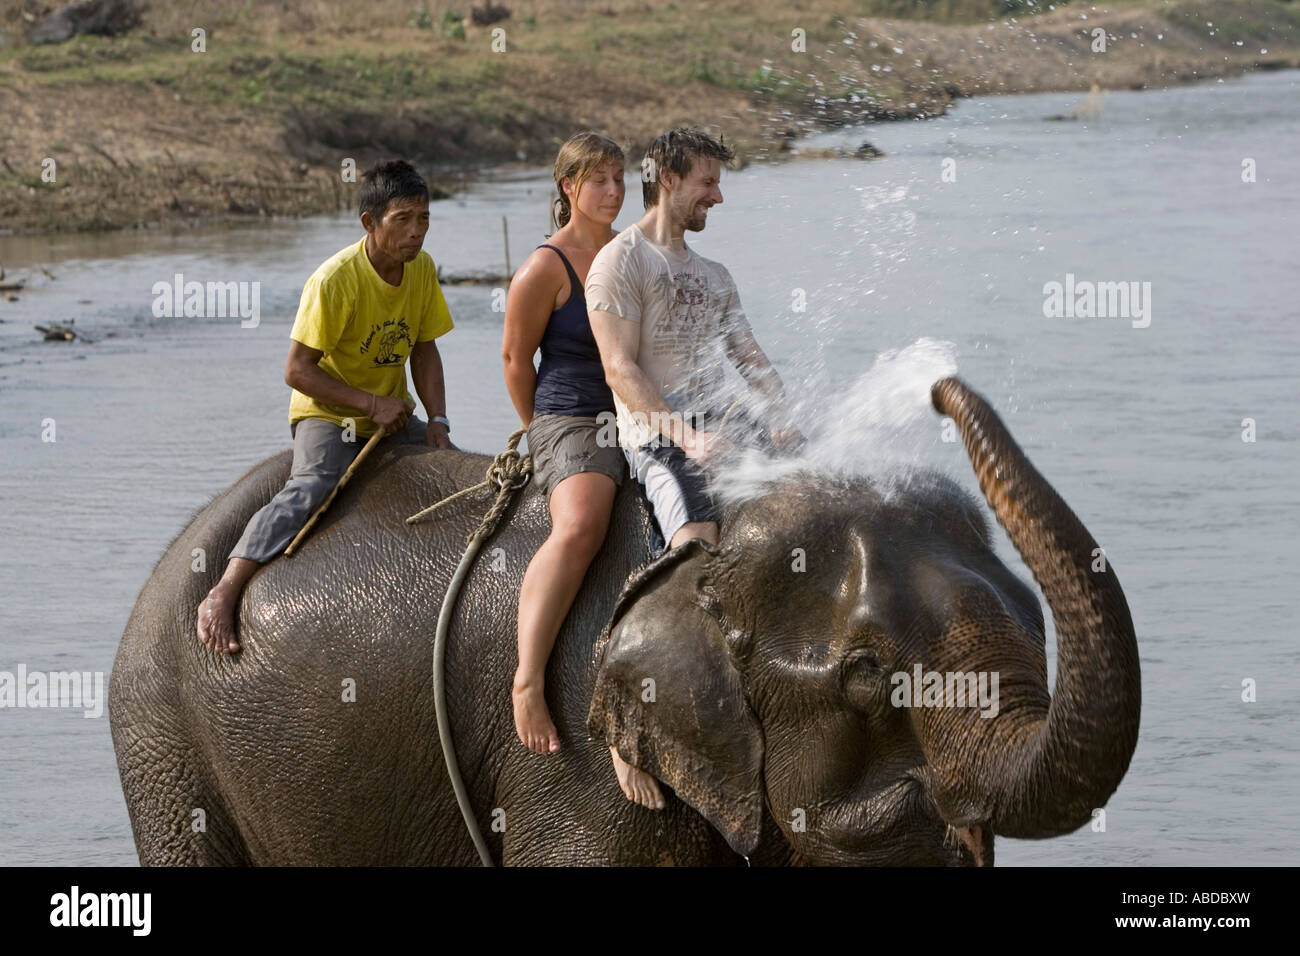 Elephants splash and spray surprising young tourists in river on trek near Pai north Thailand Stock Photo